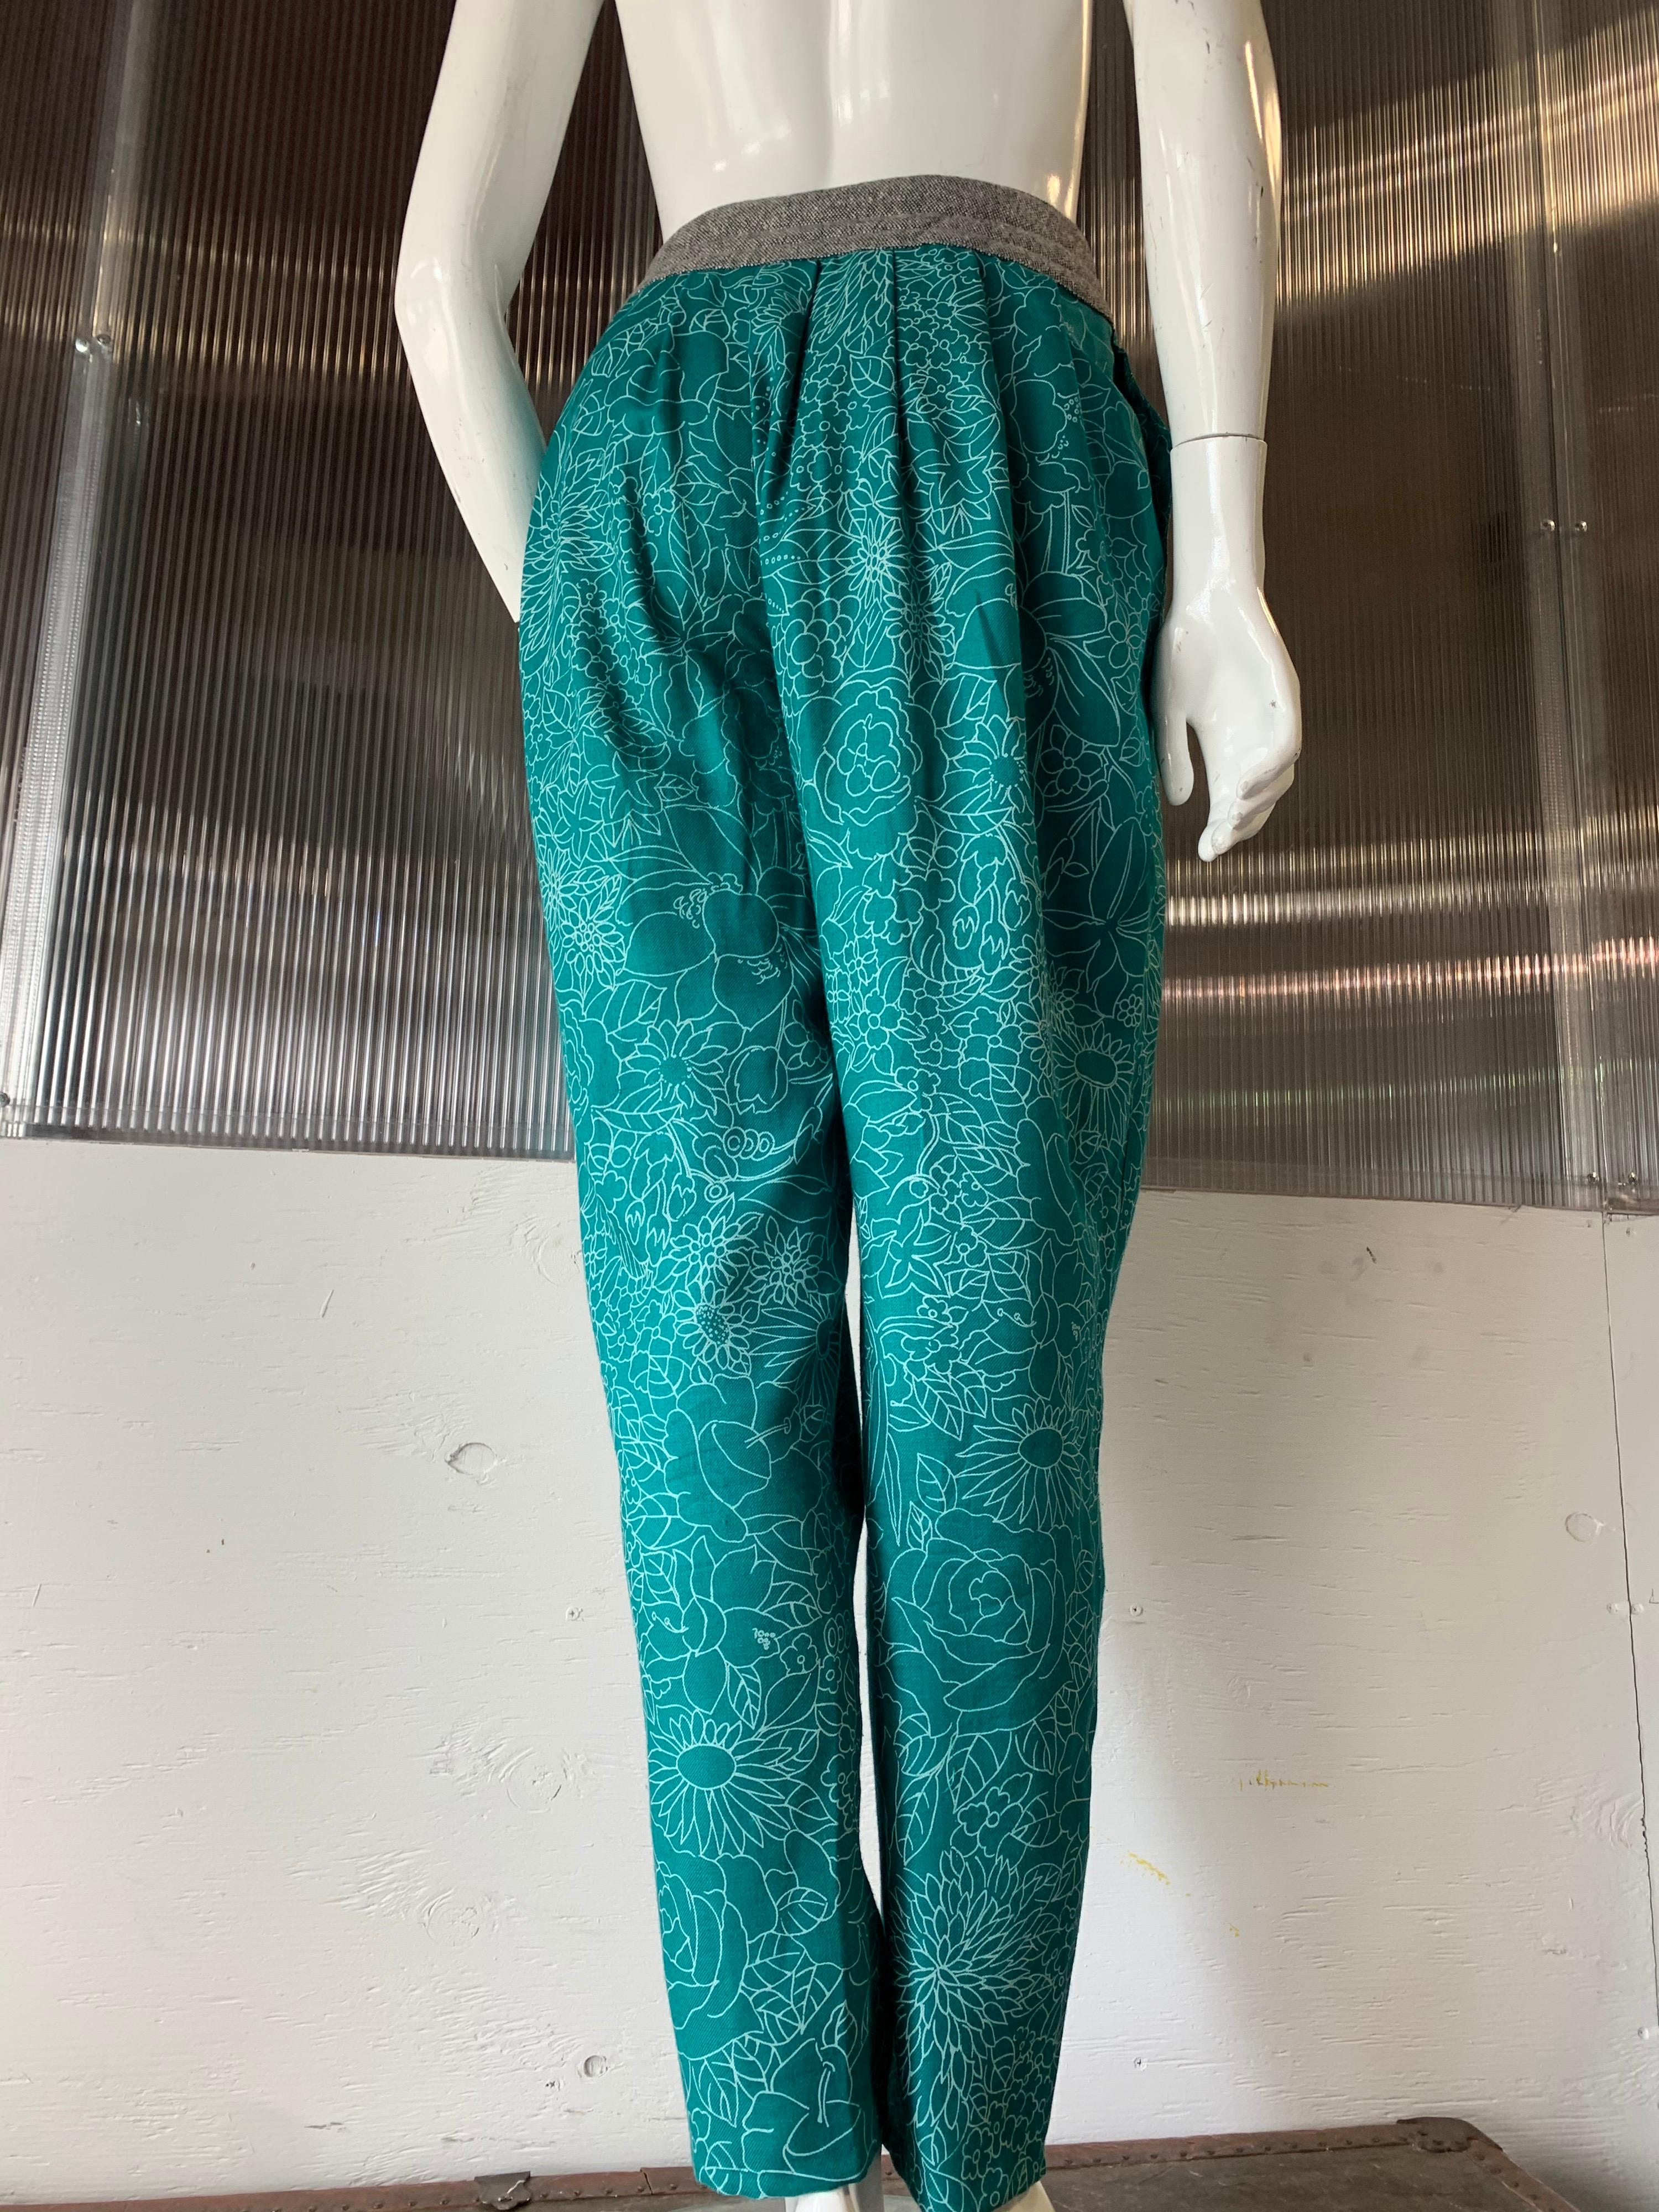 1980s Gianni Versace Harem Pants in Teal & White Floral Print & Trapunto Waist 1